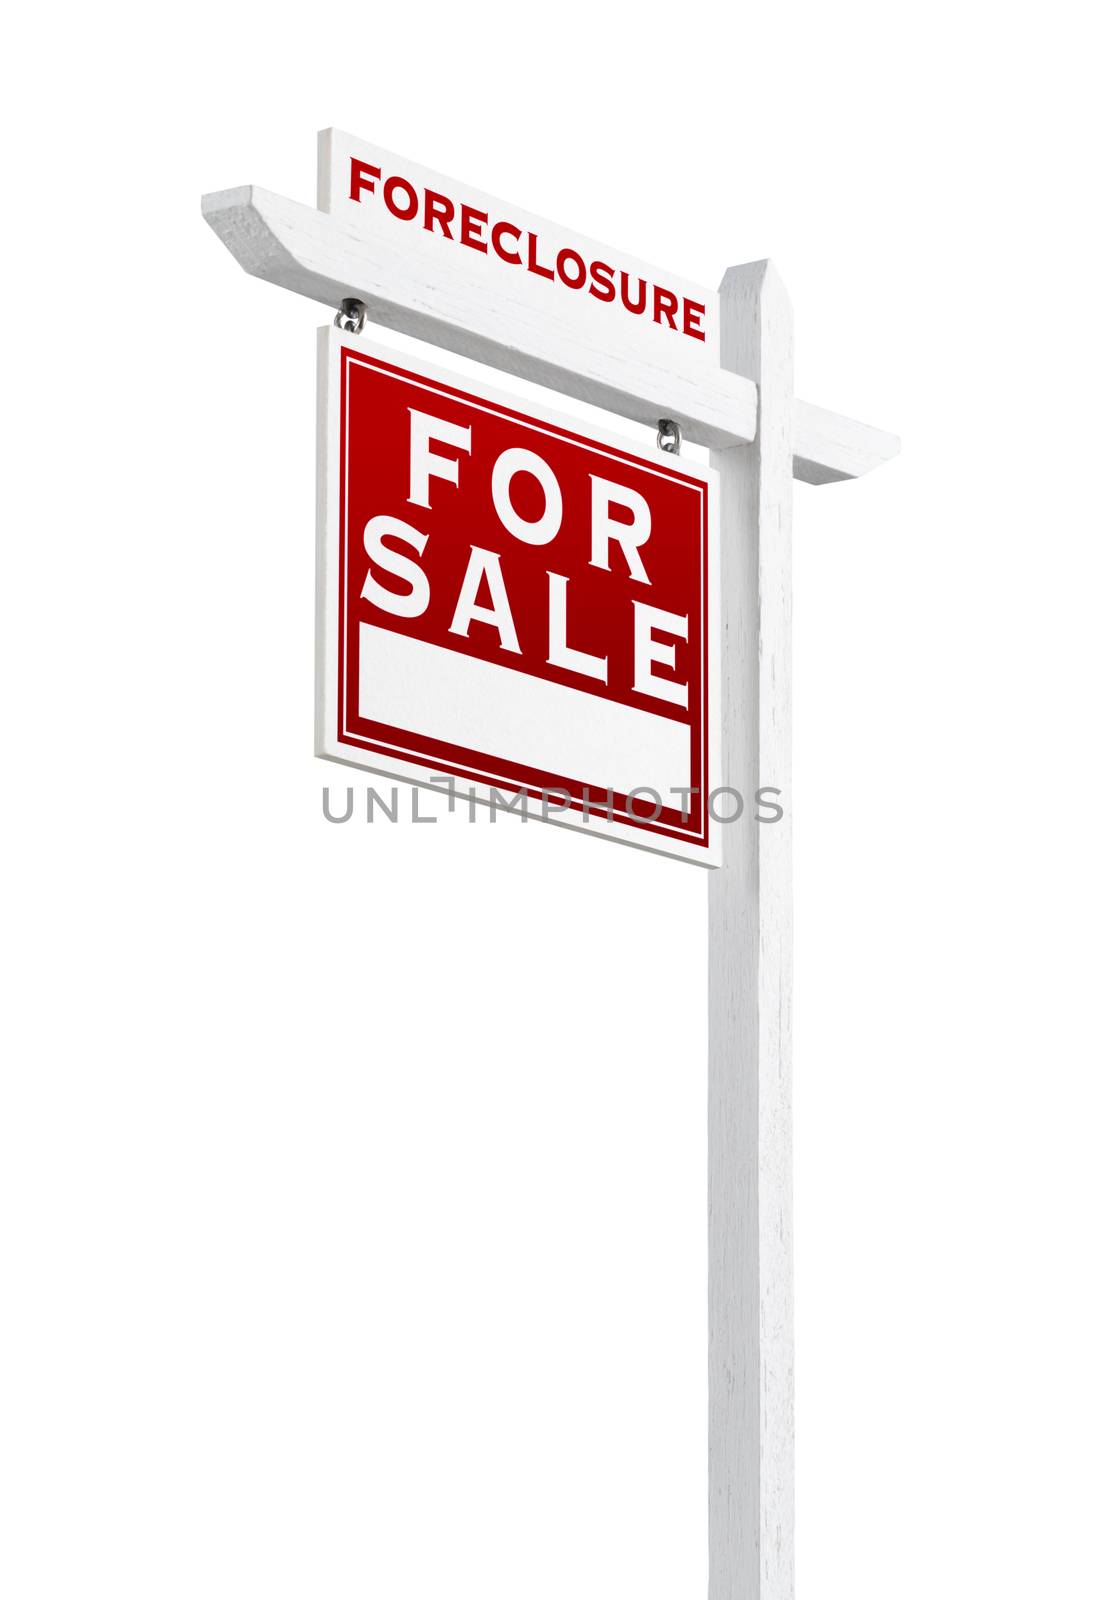 Left Facing Foreclosure Sold For Sale Real Estate Sign Isolated  by Feverpitched